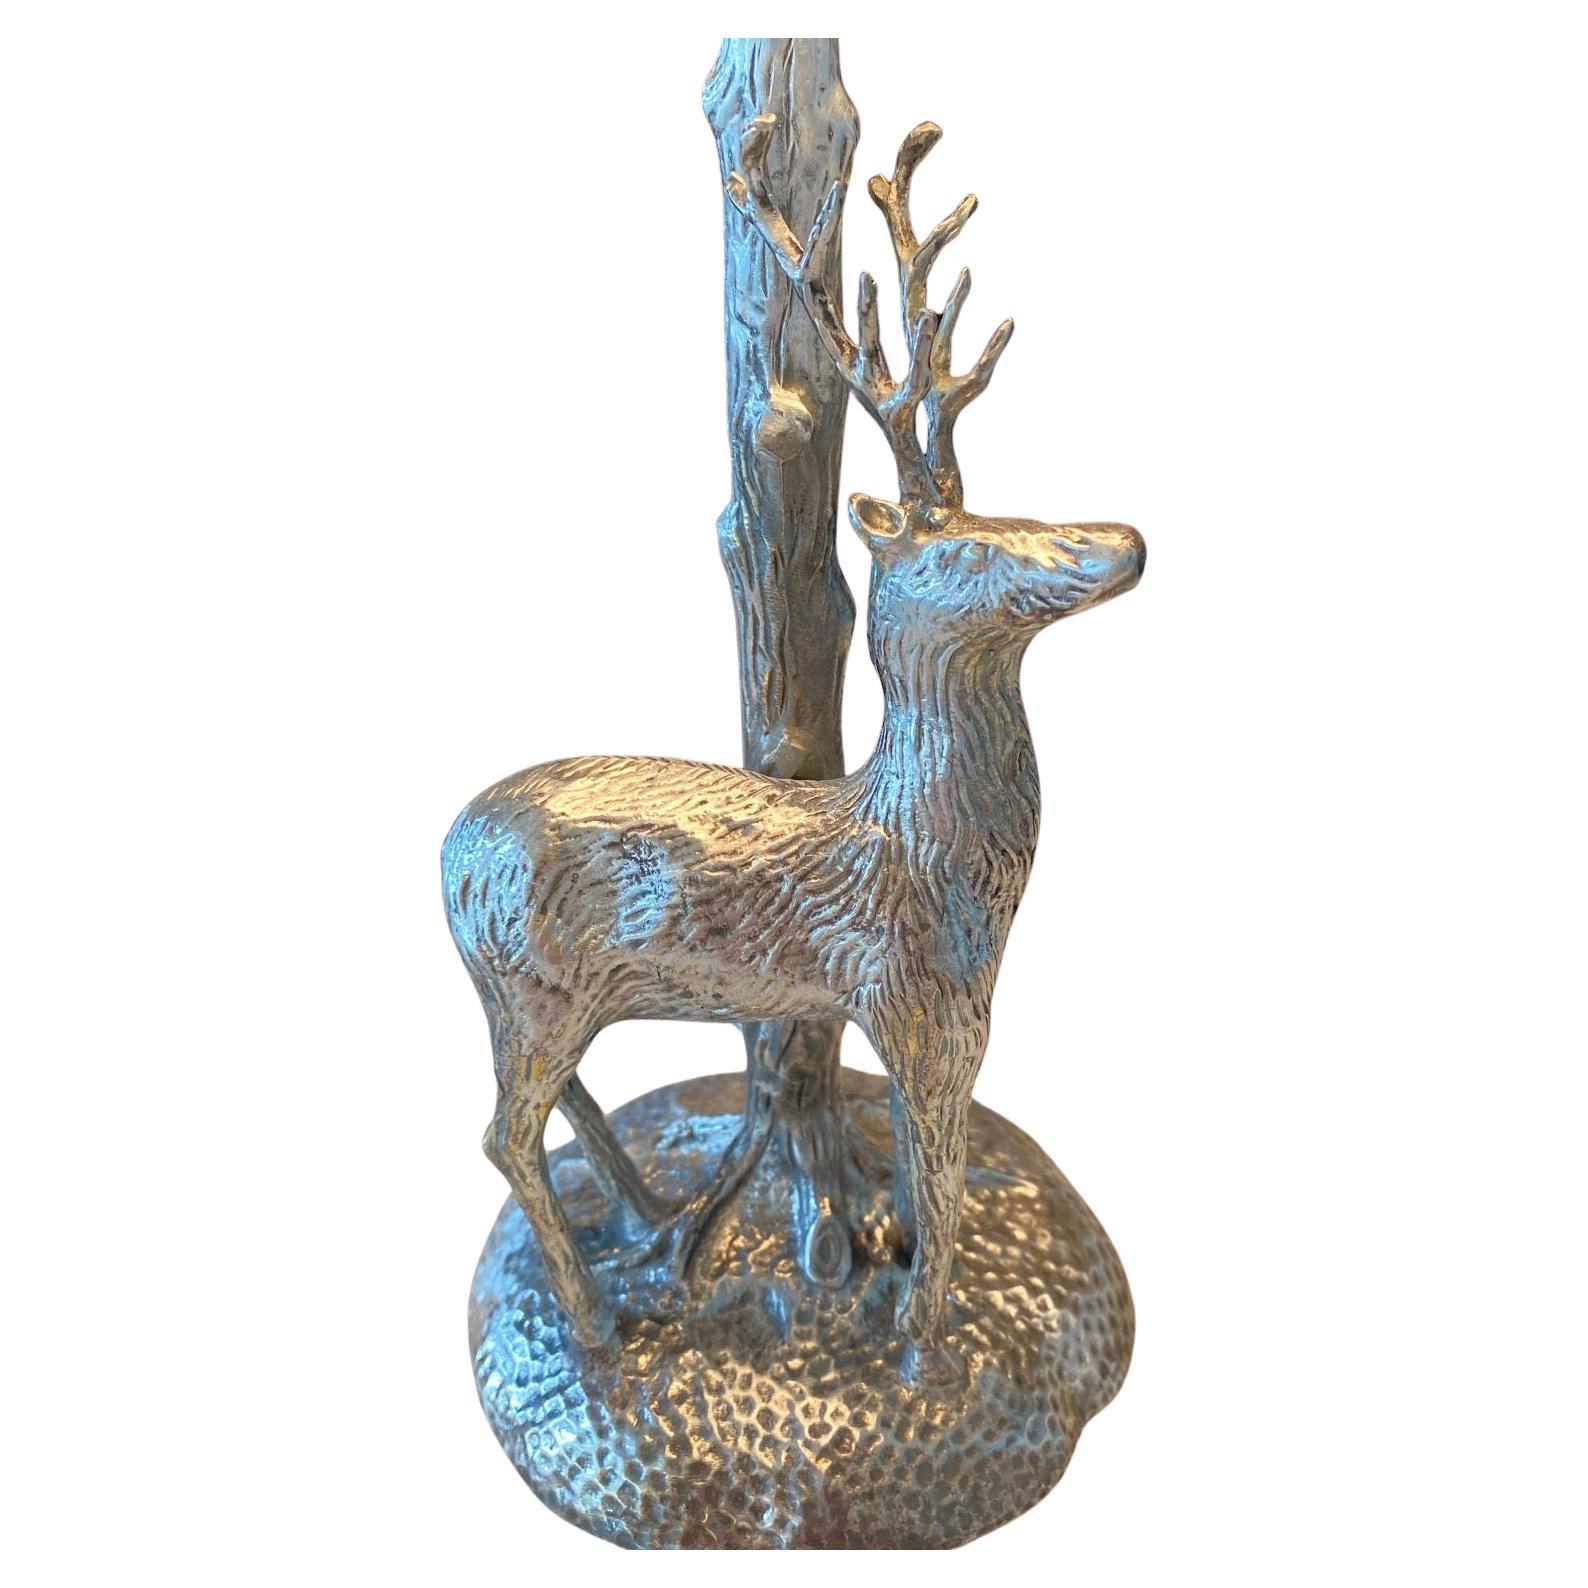 Valenti style stag table lamp, unsigned. Fine mid century quality solid silvered plate on bronze sculpture most likely by the highly sought after Spanish artist Valenti. This sculpture depicts a wild stag or deer under a beautifully sculpted simple